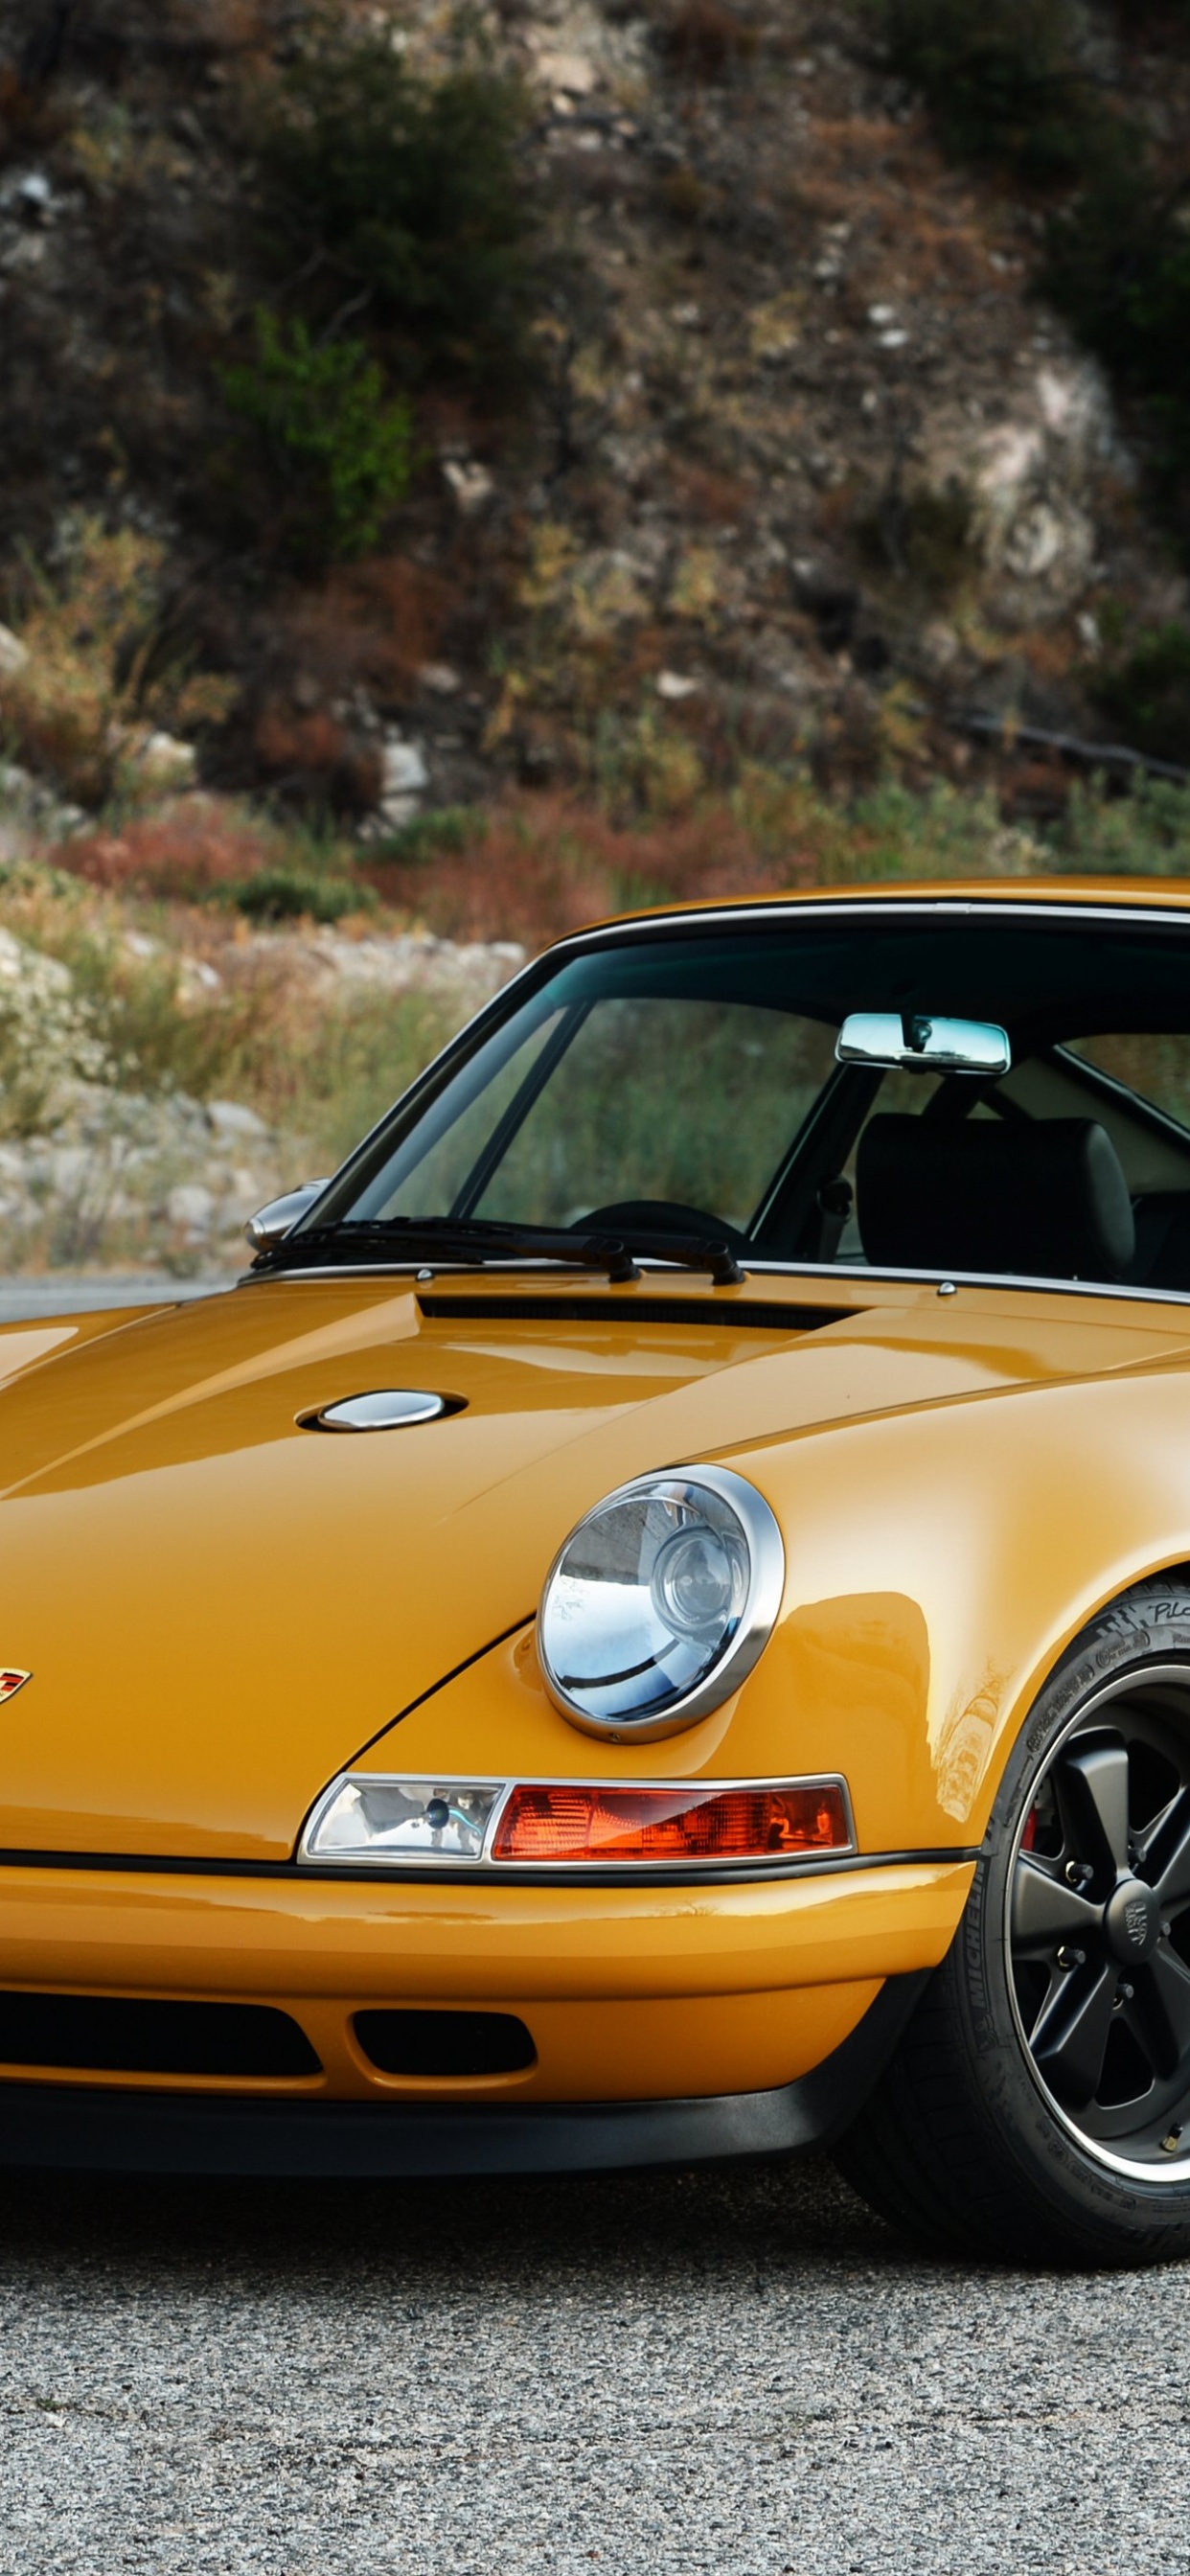 Yellow Porsche 911 on Road During Daytime. Wallpaper in 1242x2688 Resolution